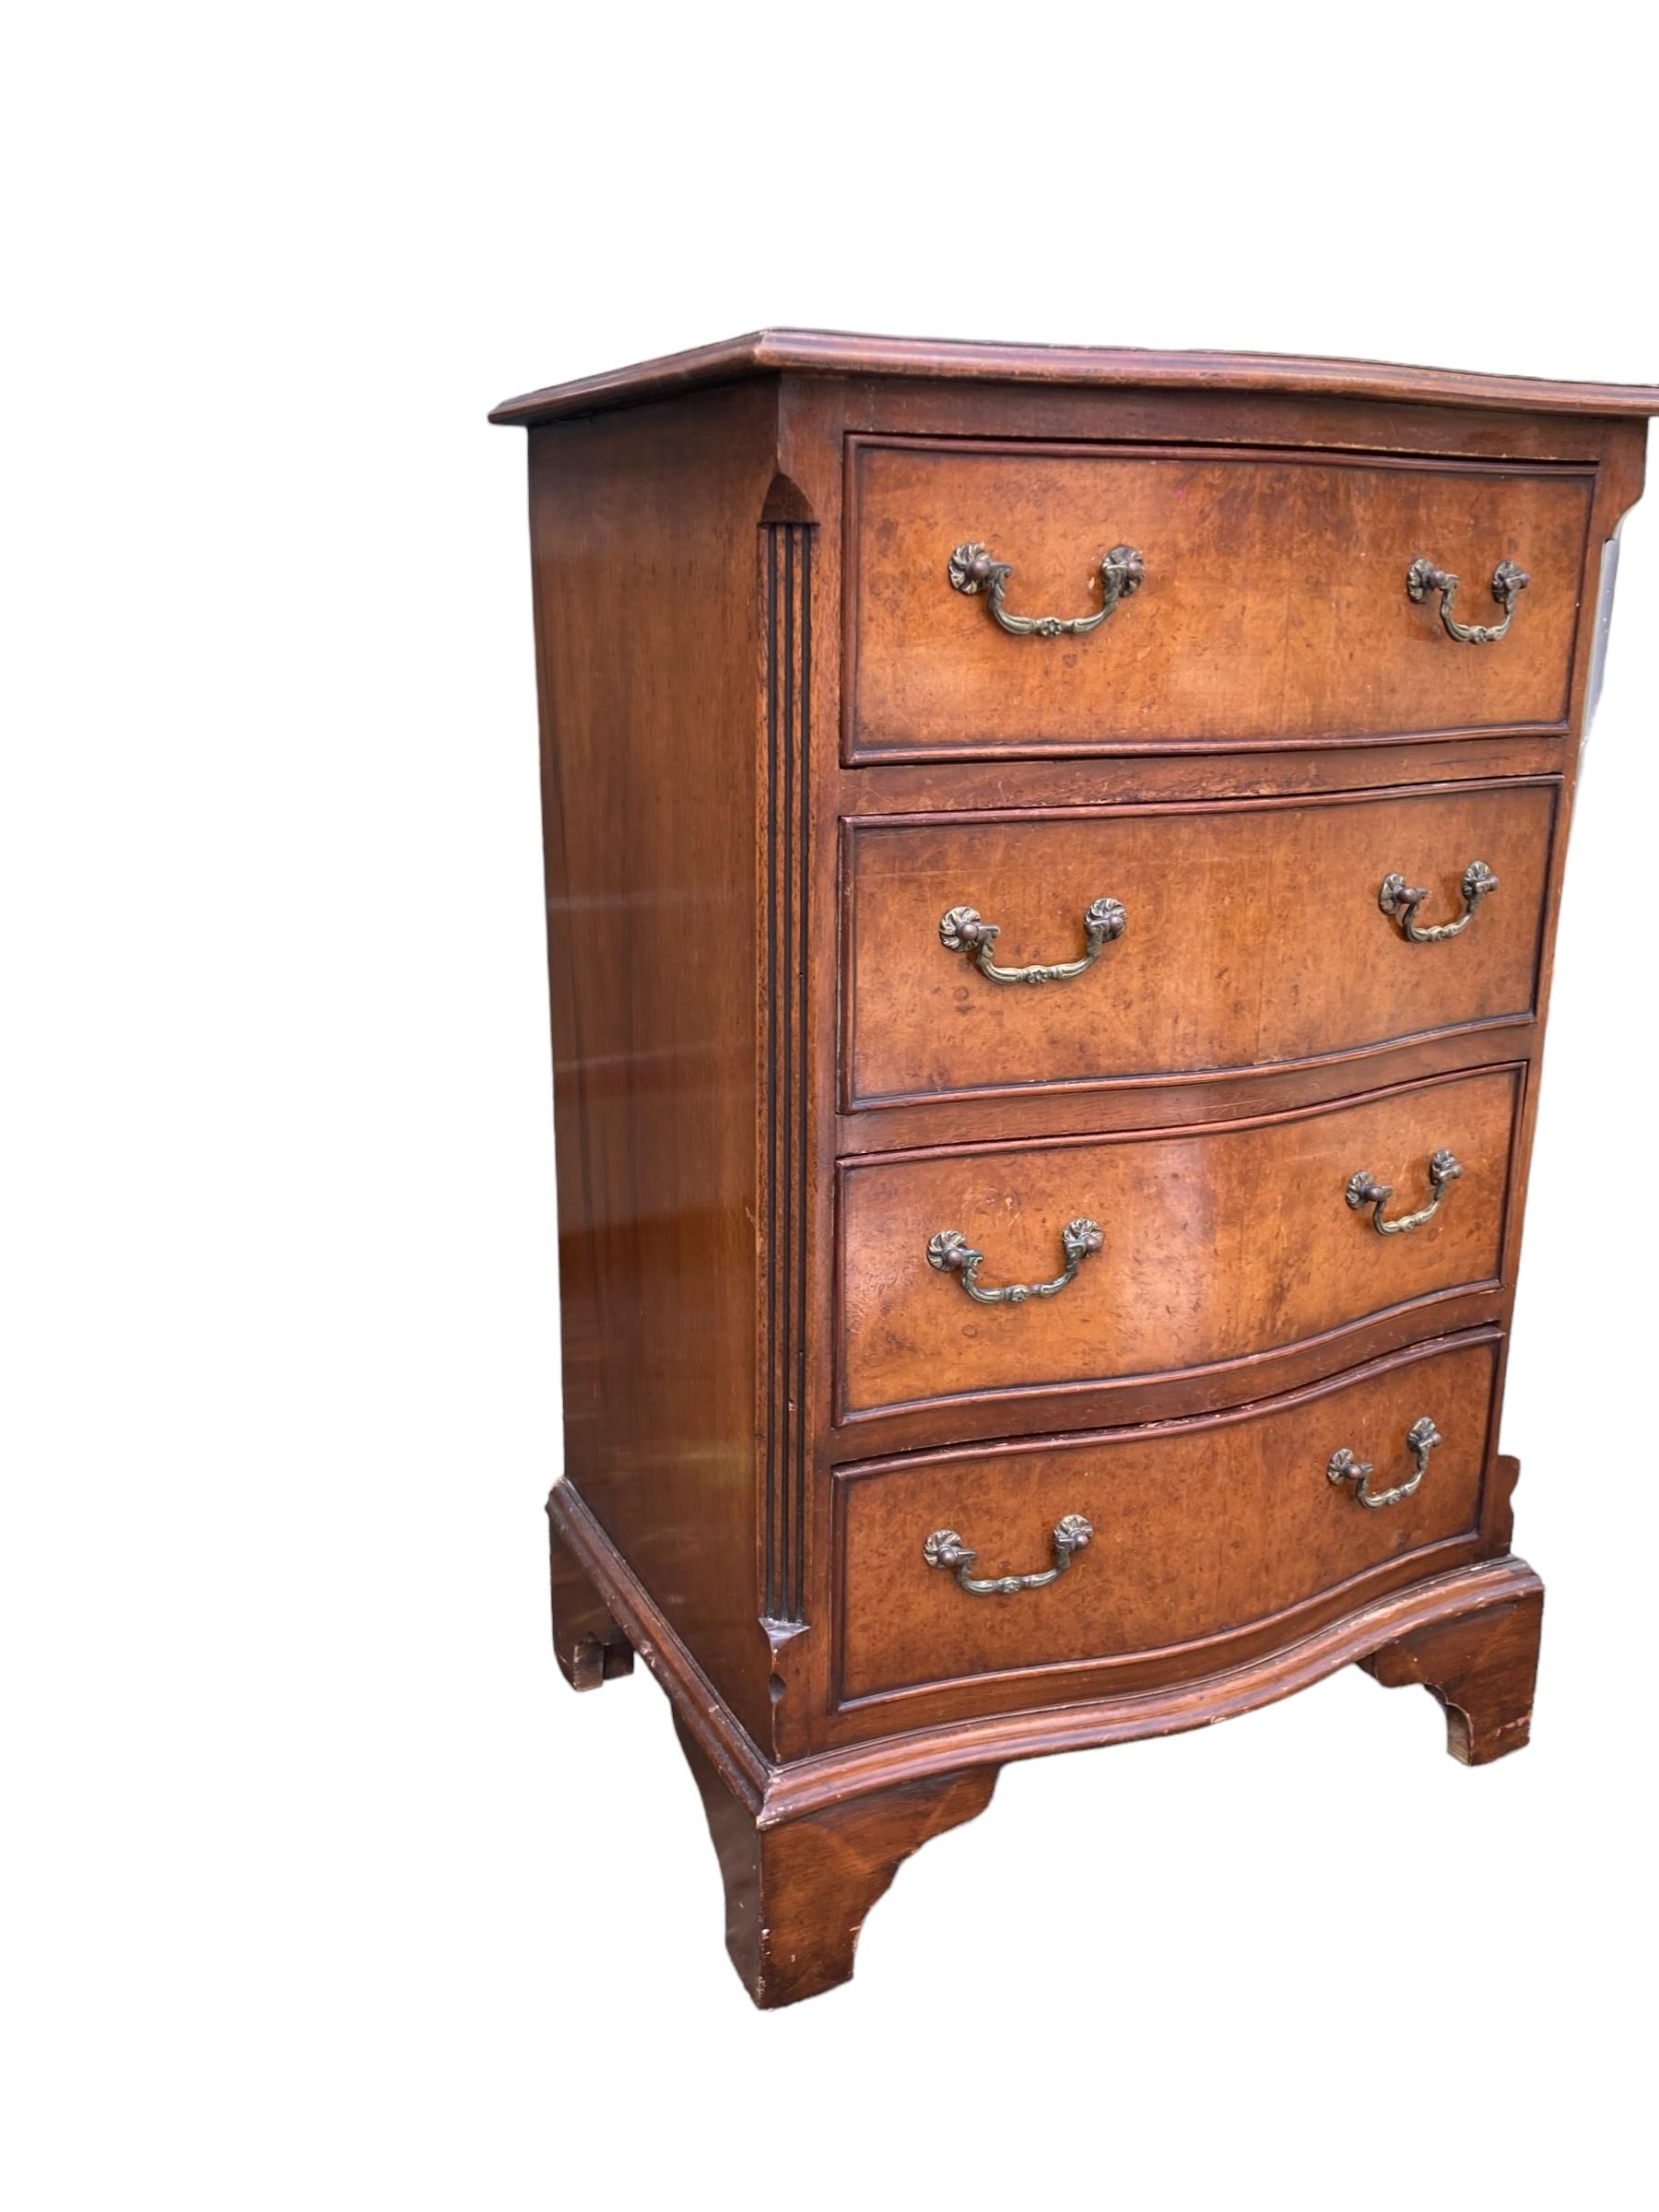 Small serpentine burr walnut veneered chest of drawers, burr walnut veneered top with cross banded border. It has four drawers with brass drop handles. It stands on bracket feet. Polished walnut sides and solid back. A beautiful example. Early 20th